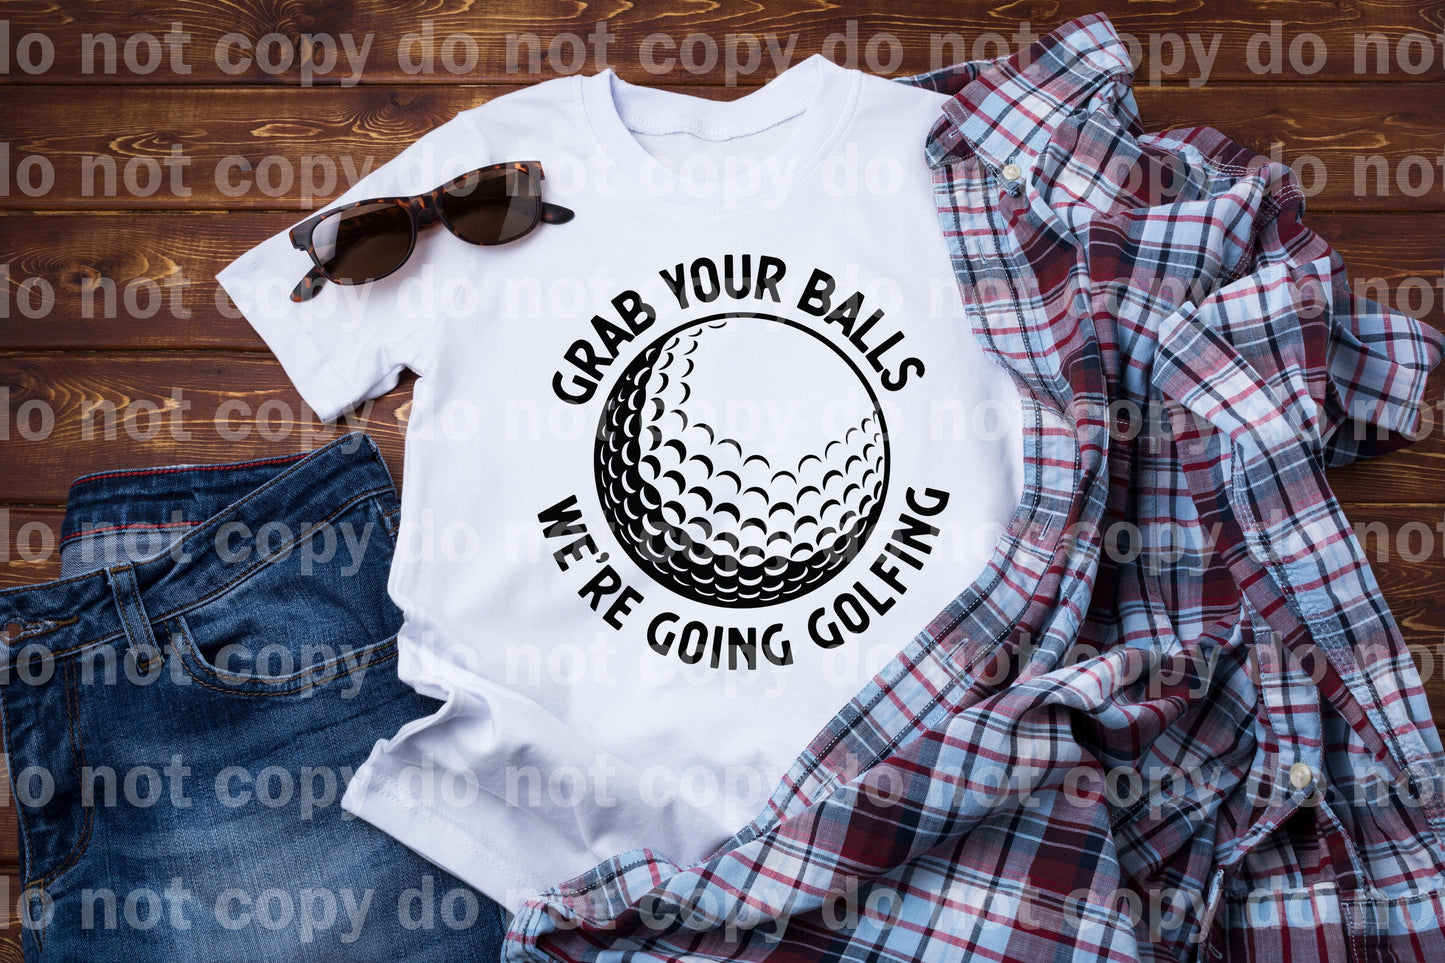 Grab Your Balls We're Doing Golfing Black/White Dream Print or Sublimation Print